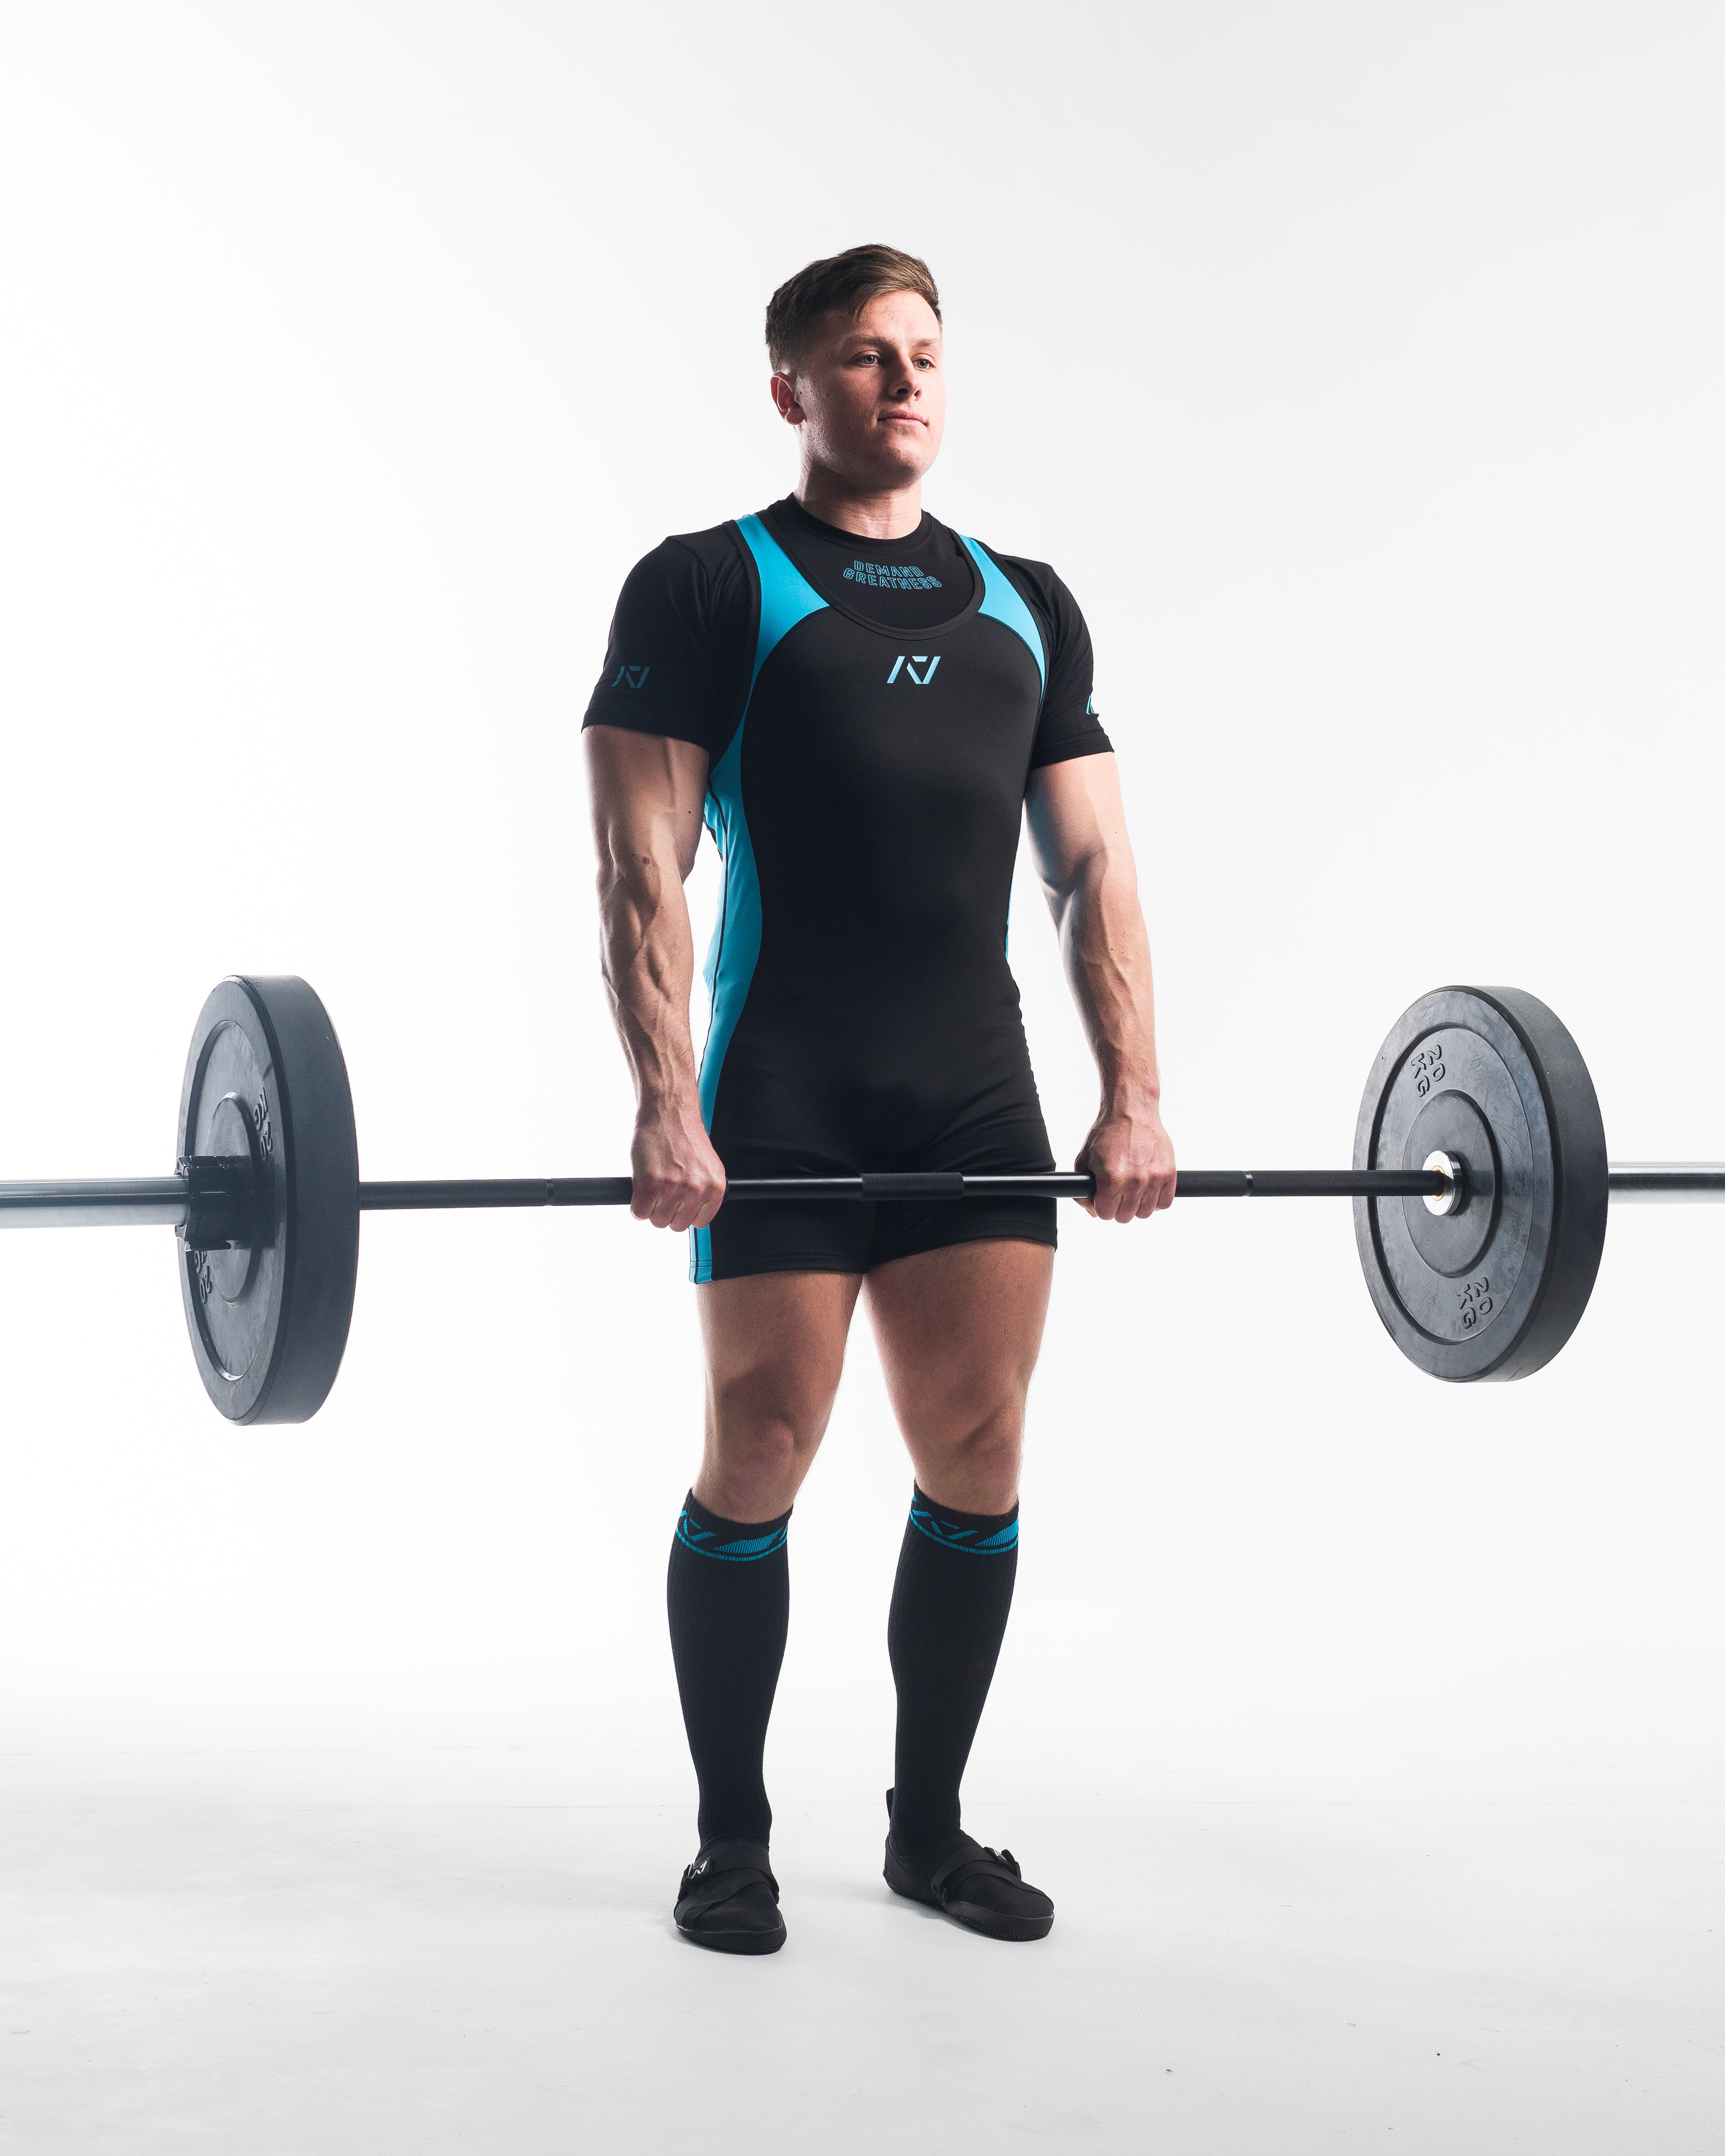 A7 IPF Approved Azul Luno singlet features extra lat mobility, side panel stitching to guide the squat depth level and curved panel design for a slimming look. The Women's cut singlet features a tapered waist and additional quad room. The IPF Approved Kit includes Powerlifting Singlet, A7 Meet Shirt, A7 Deadlift Socks. Genouillères powerlifting shipping to France, Spain, Ireland, Germany, Italy, Sweden and EU.